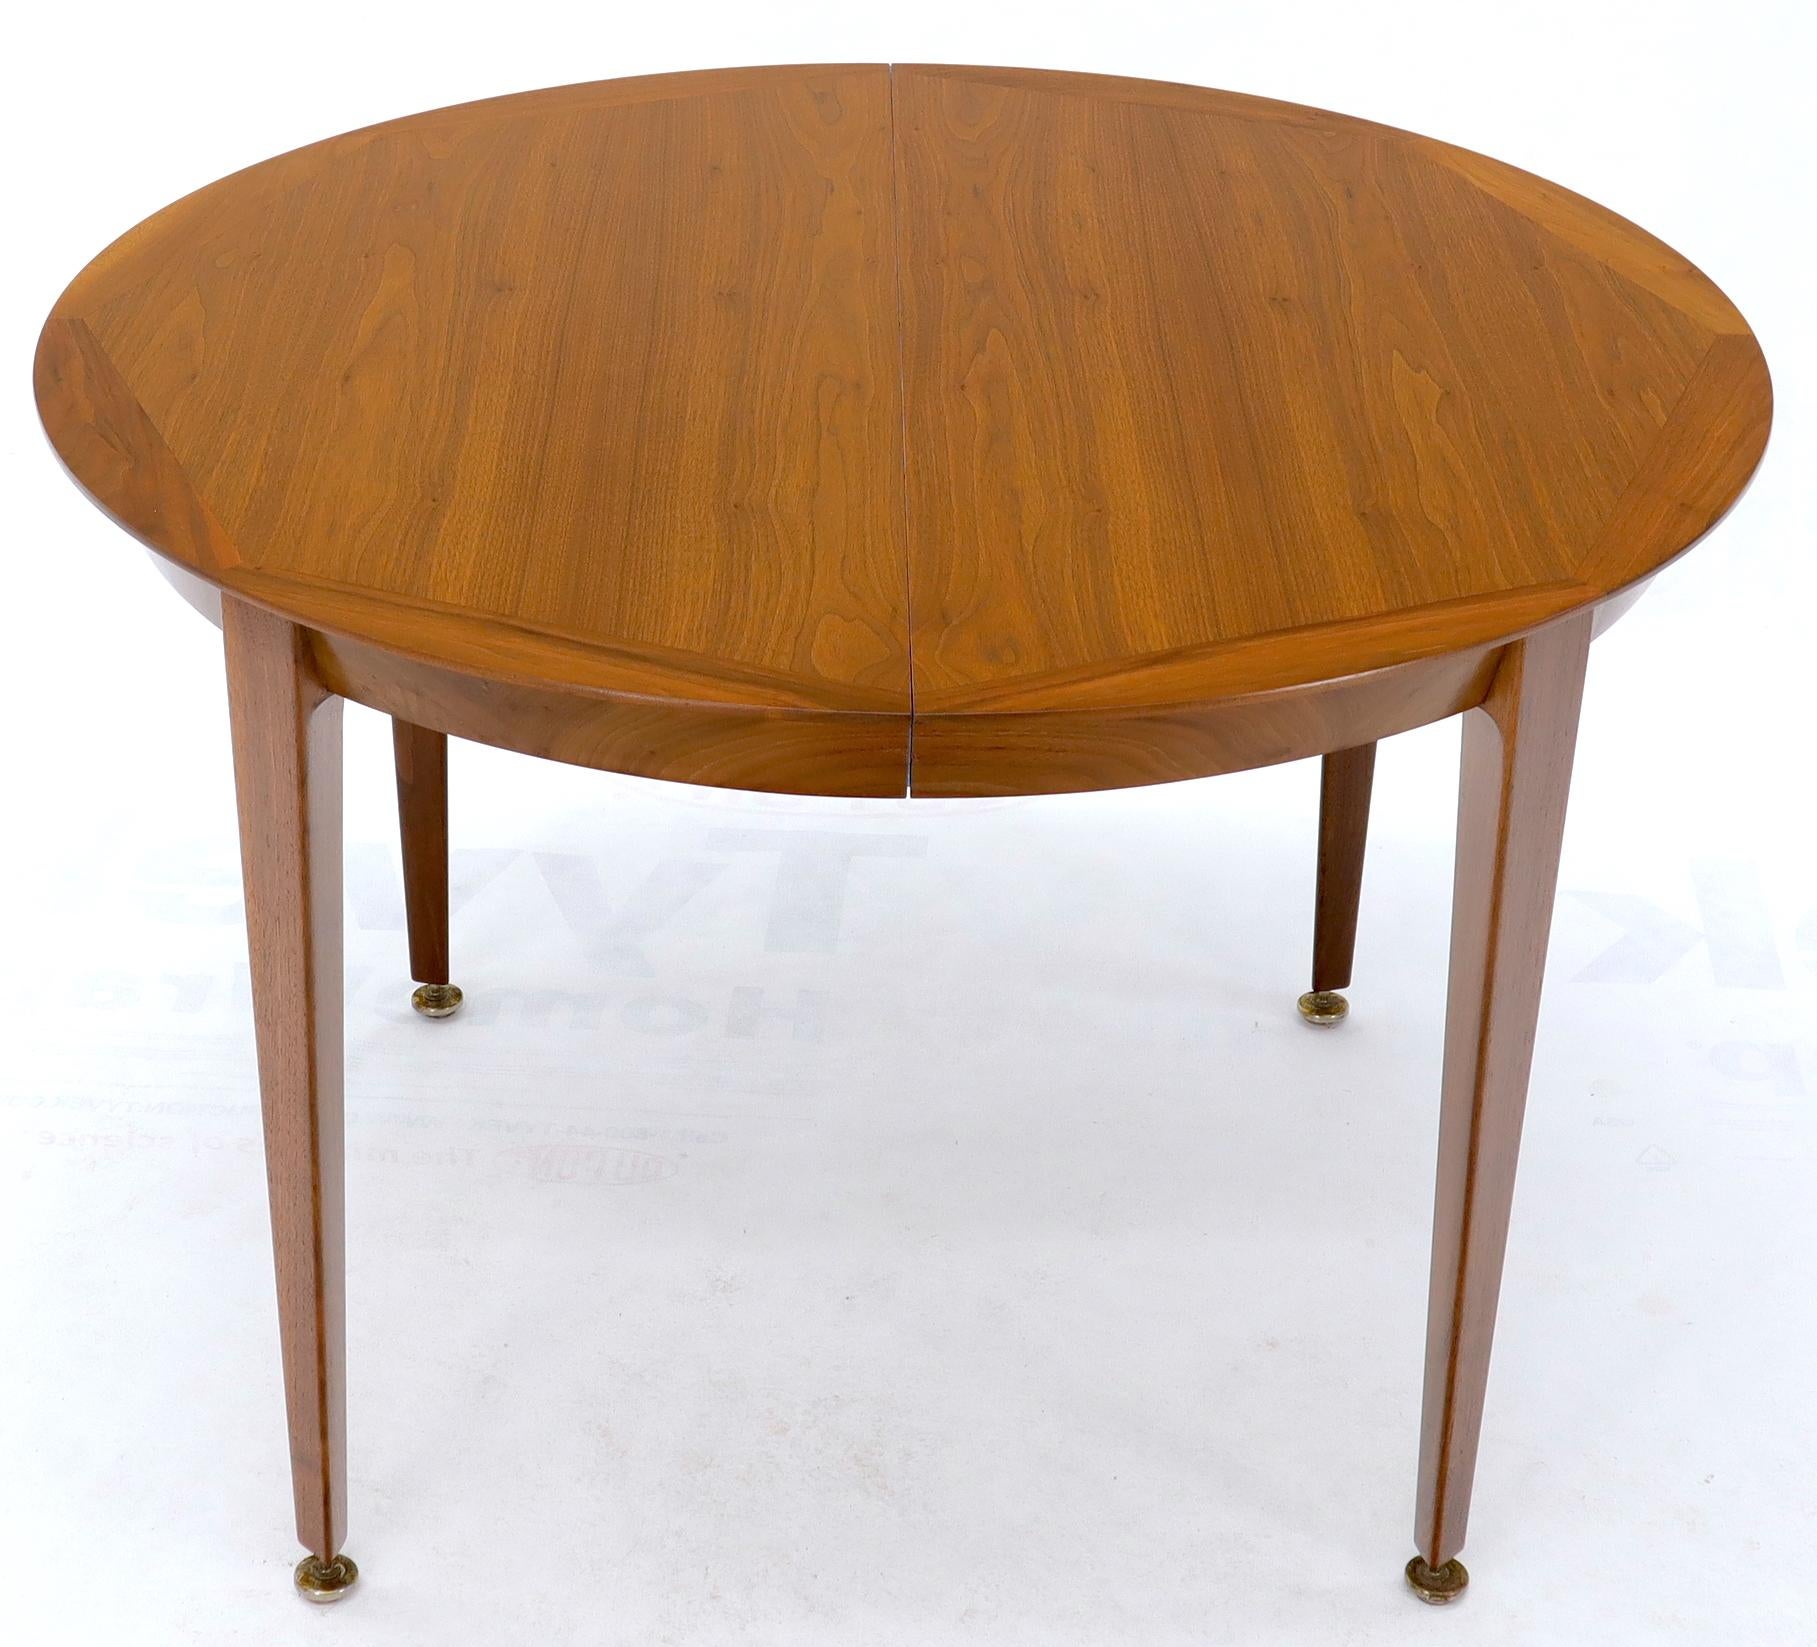 Mid-Century Modern Round Walnut Tapered Legs Dining Room Table with Two Extensions Boards For Sale